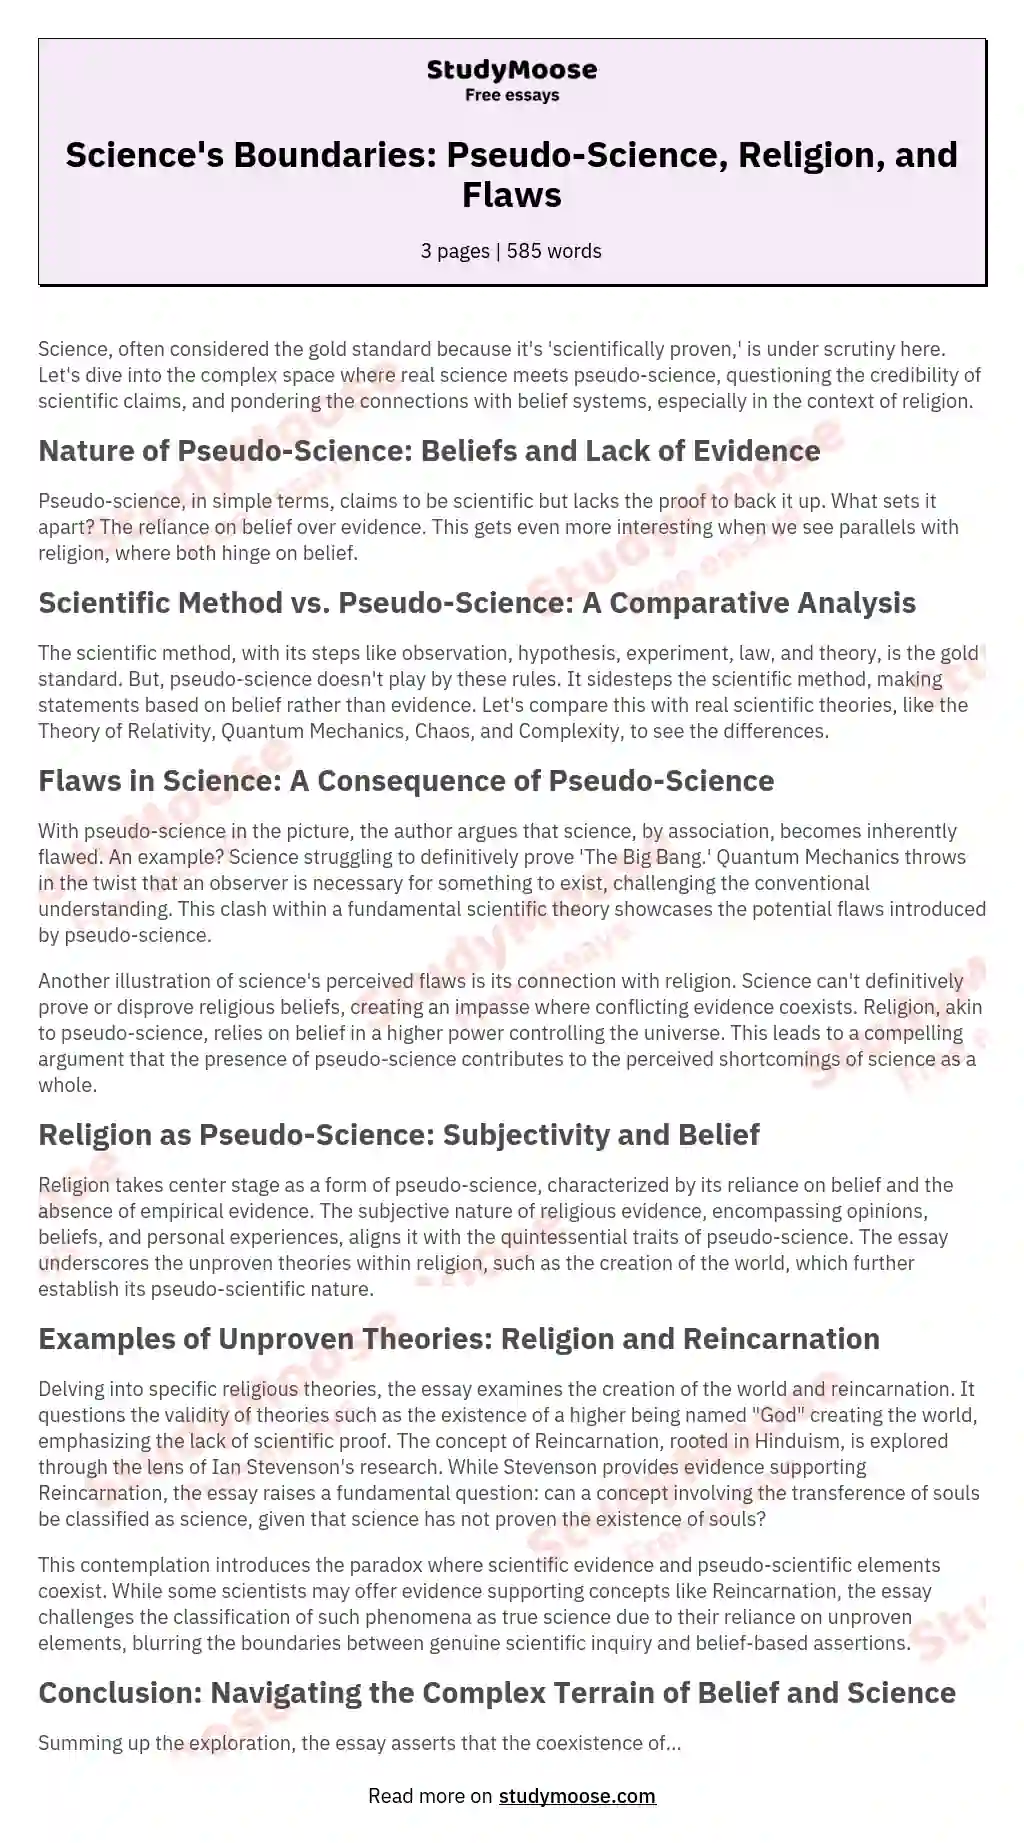 Science's Boundaries: Pseudo-Science, Religion, and Flaws essay